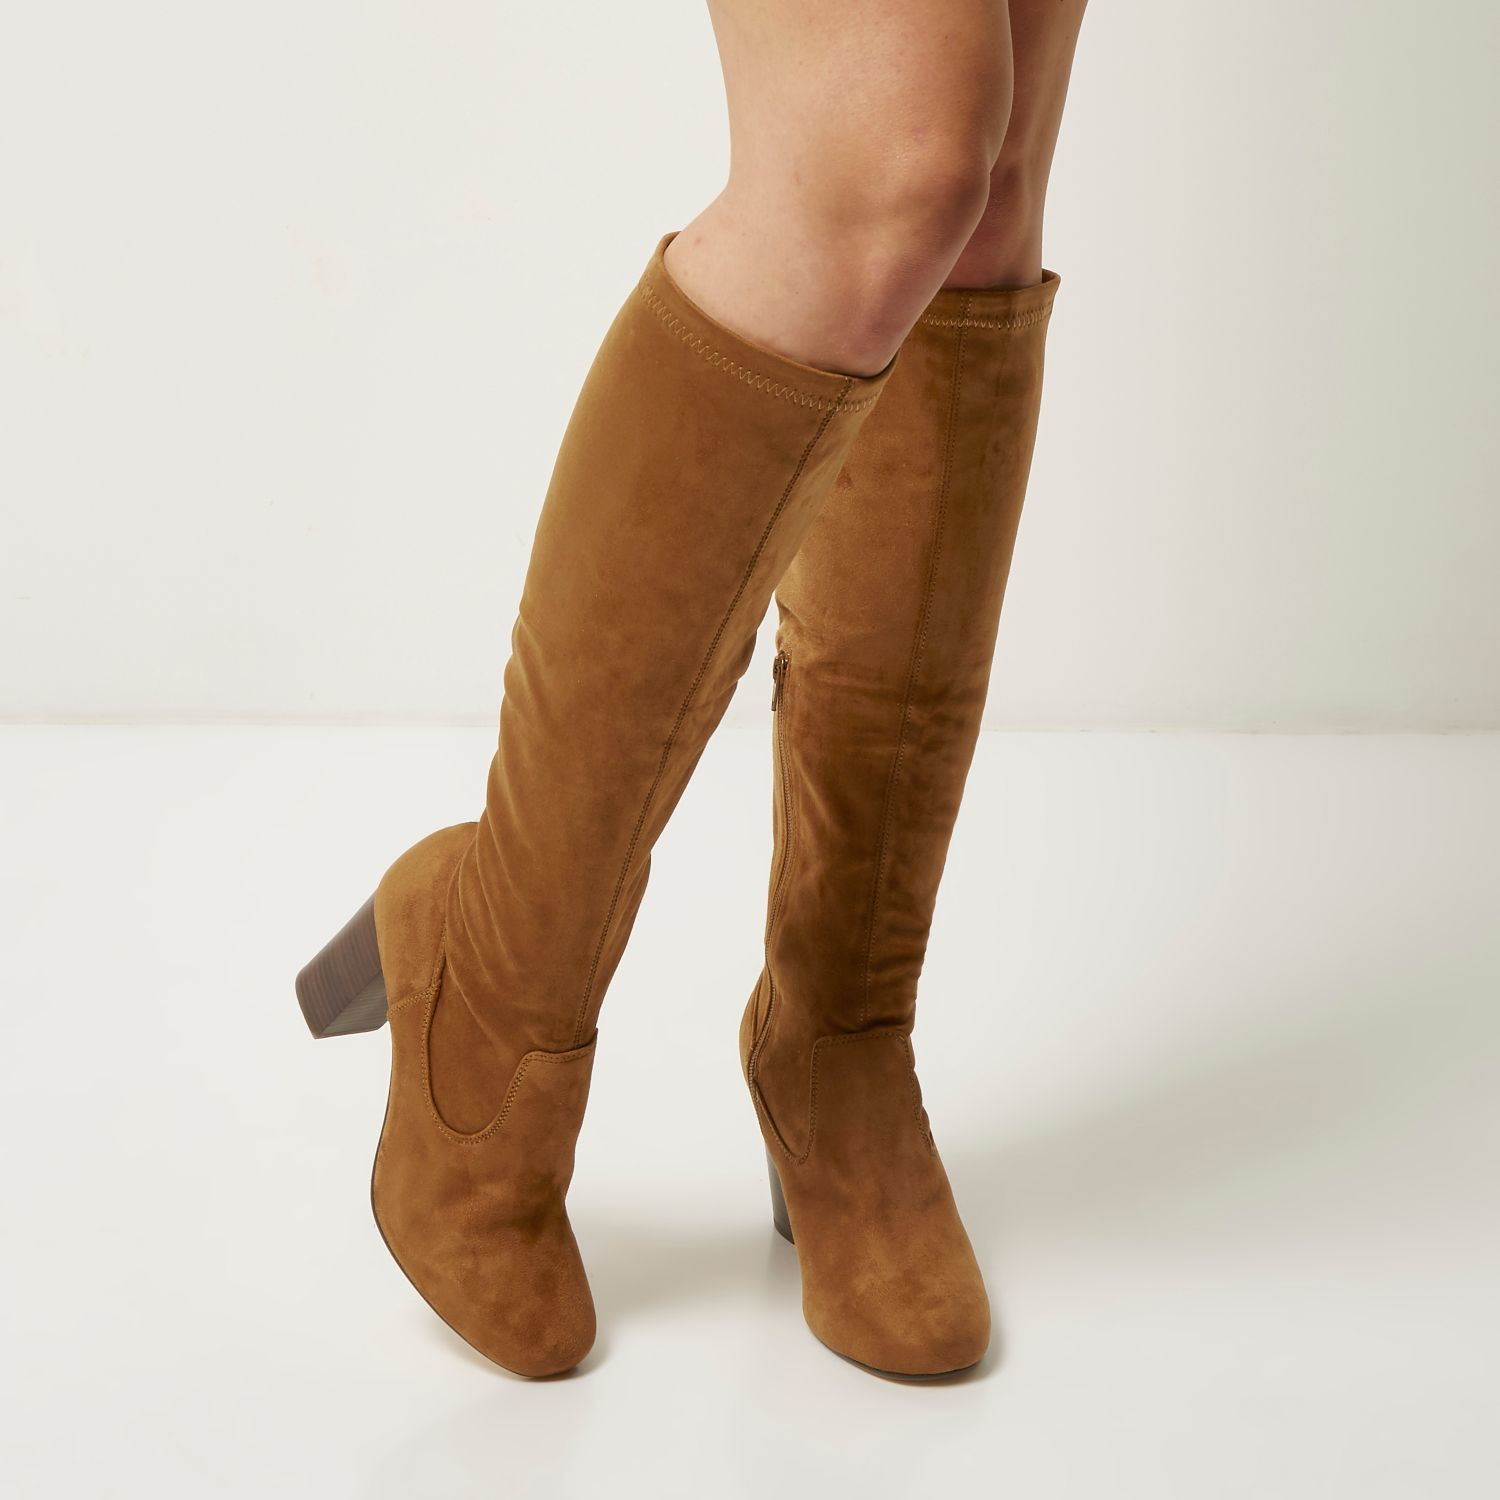 River Island Tan Faux Suede Heeled Knee High Boots in Brown - Lyst